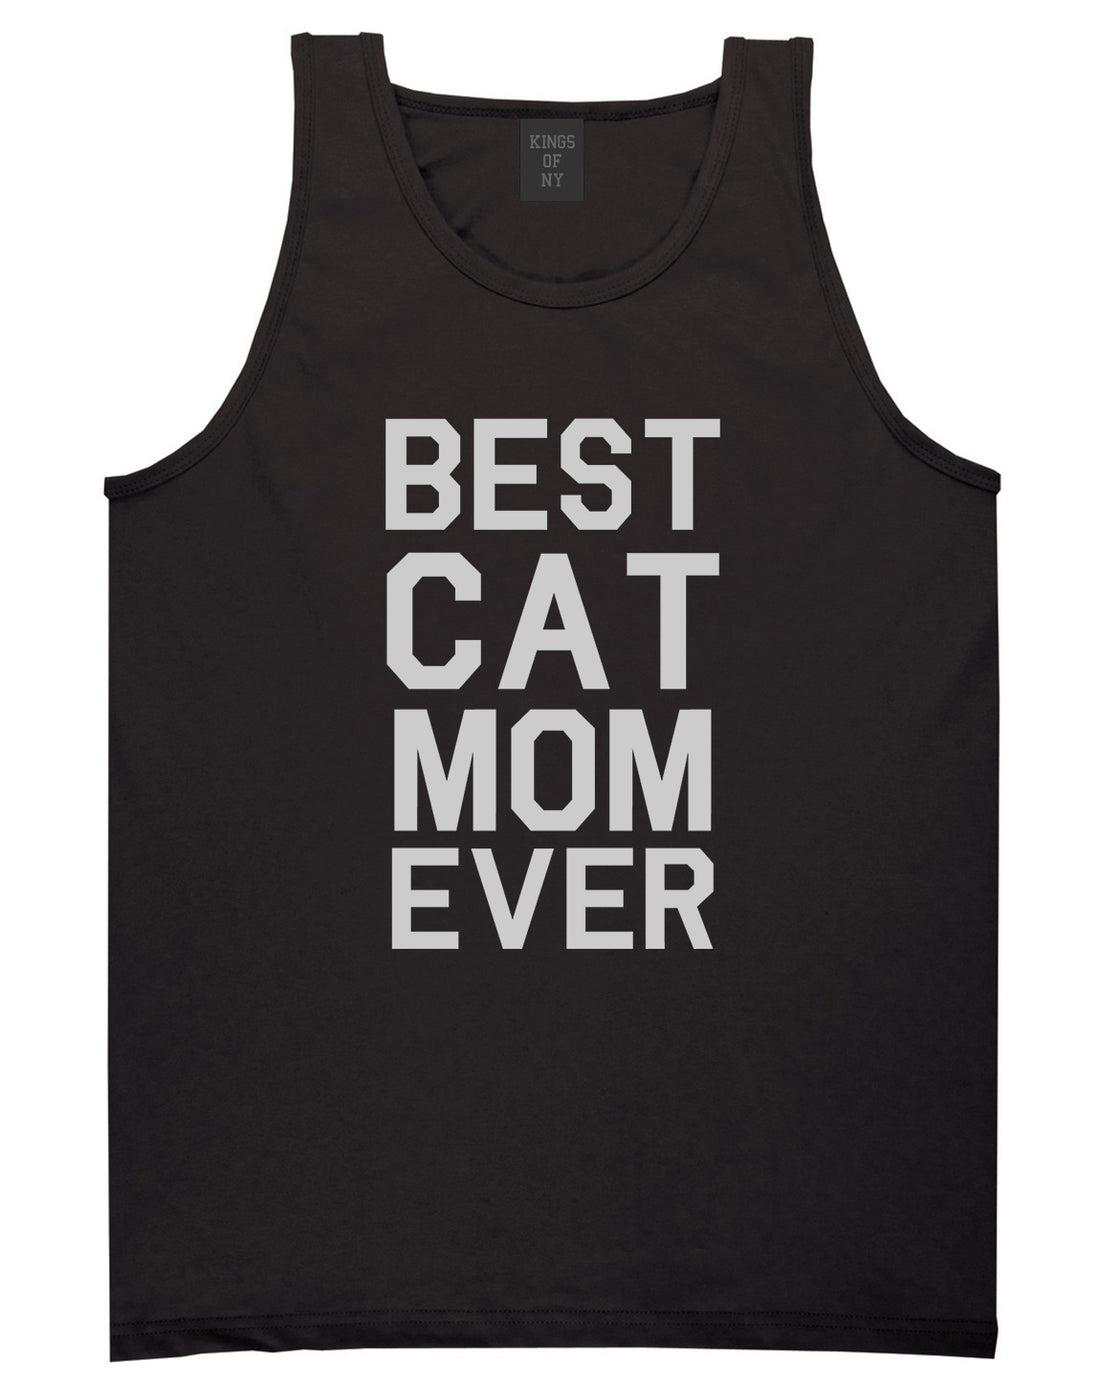 Best_Cat_Mom_Ever Mens Black Tank Top Shirt by Kings Of NY